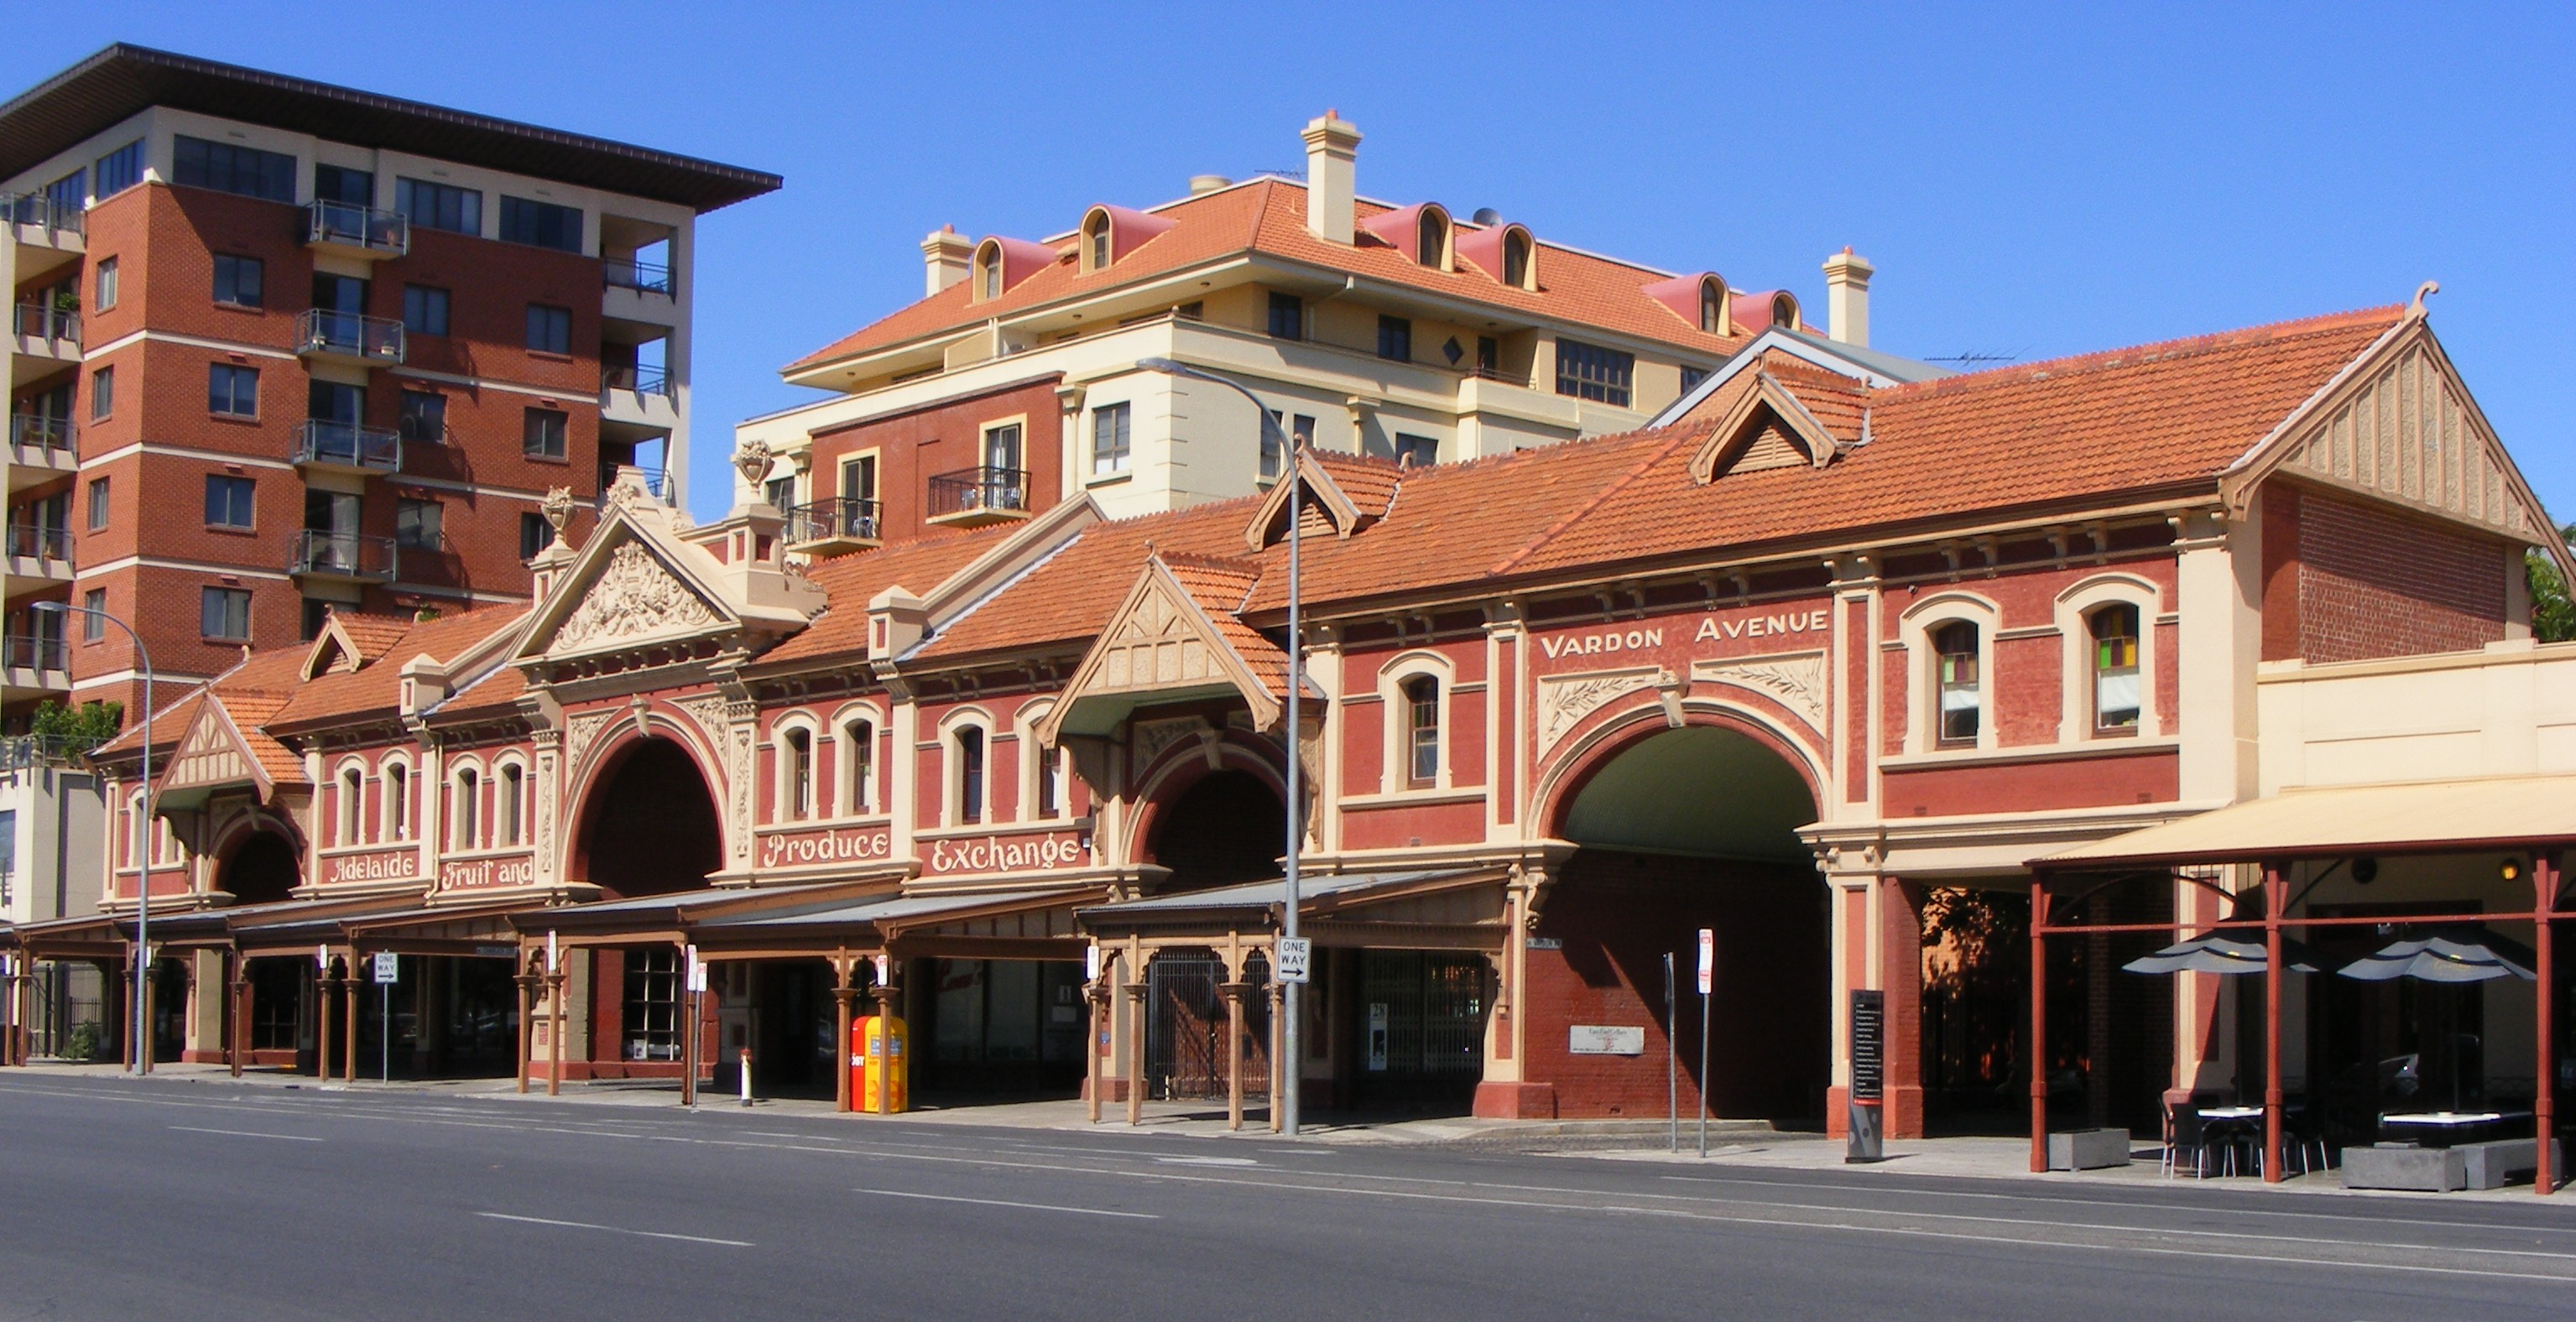 Adelaide's East End